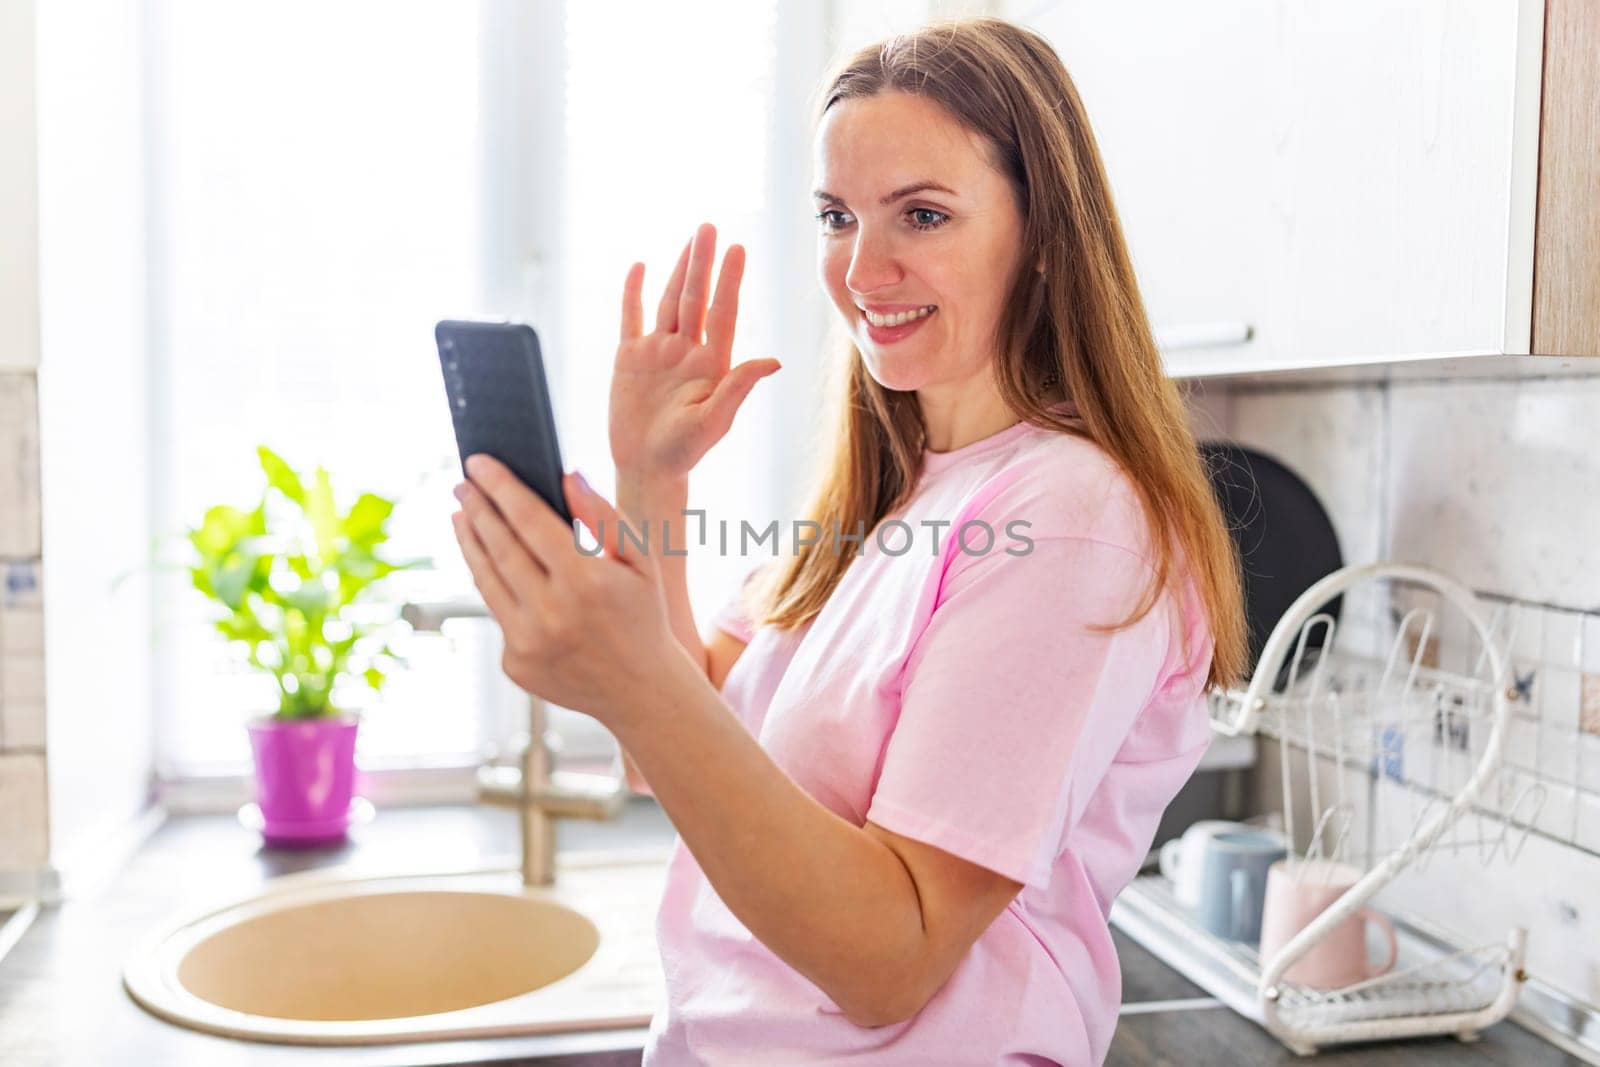 Woman waving at phone during a video call in a bright kitchen. Casual home lifestyle concept